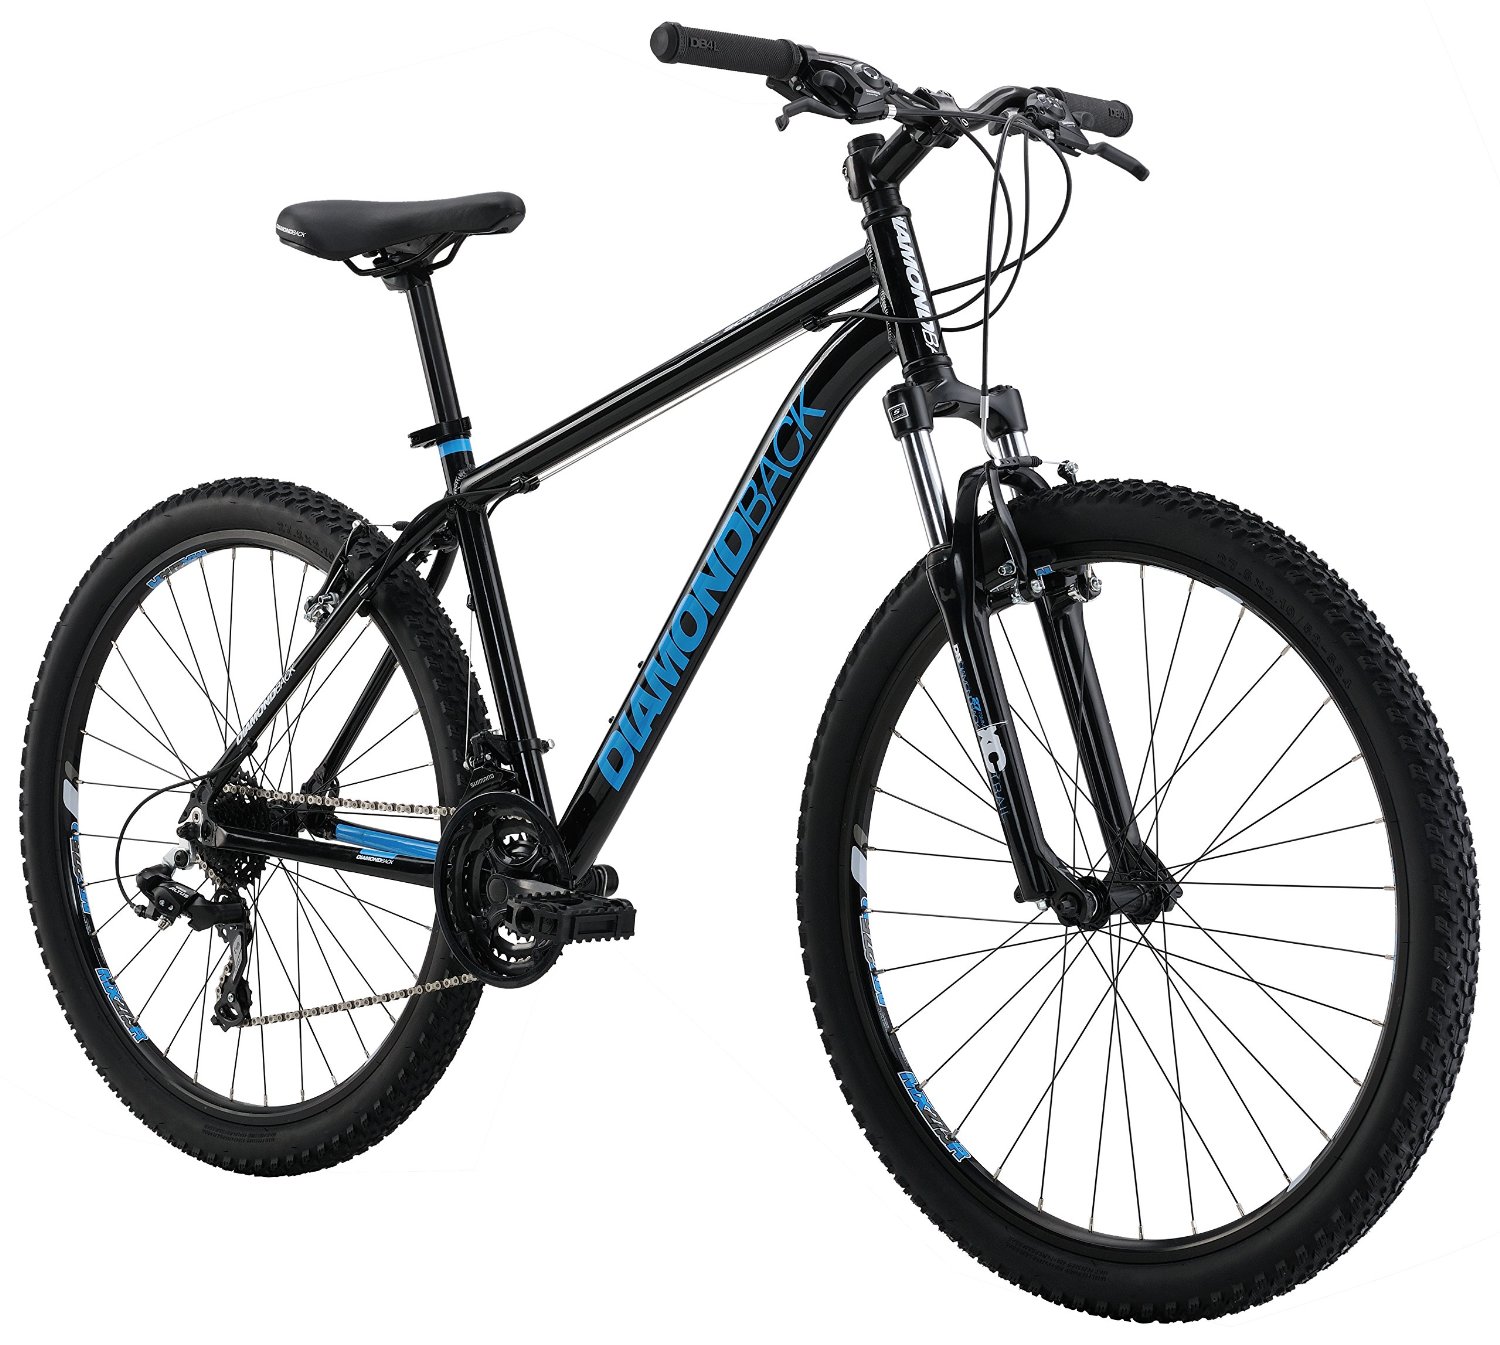 Mountain Bike Black Friday Deals, Sales and Ads